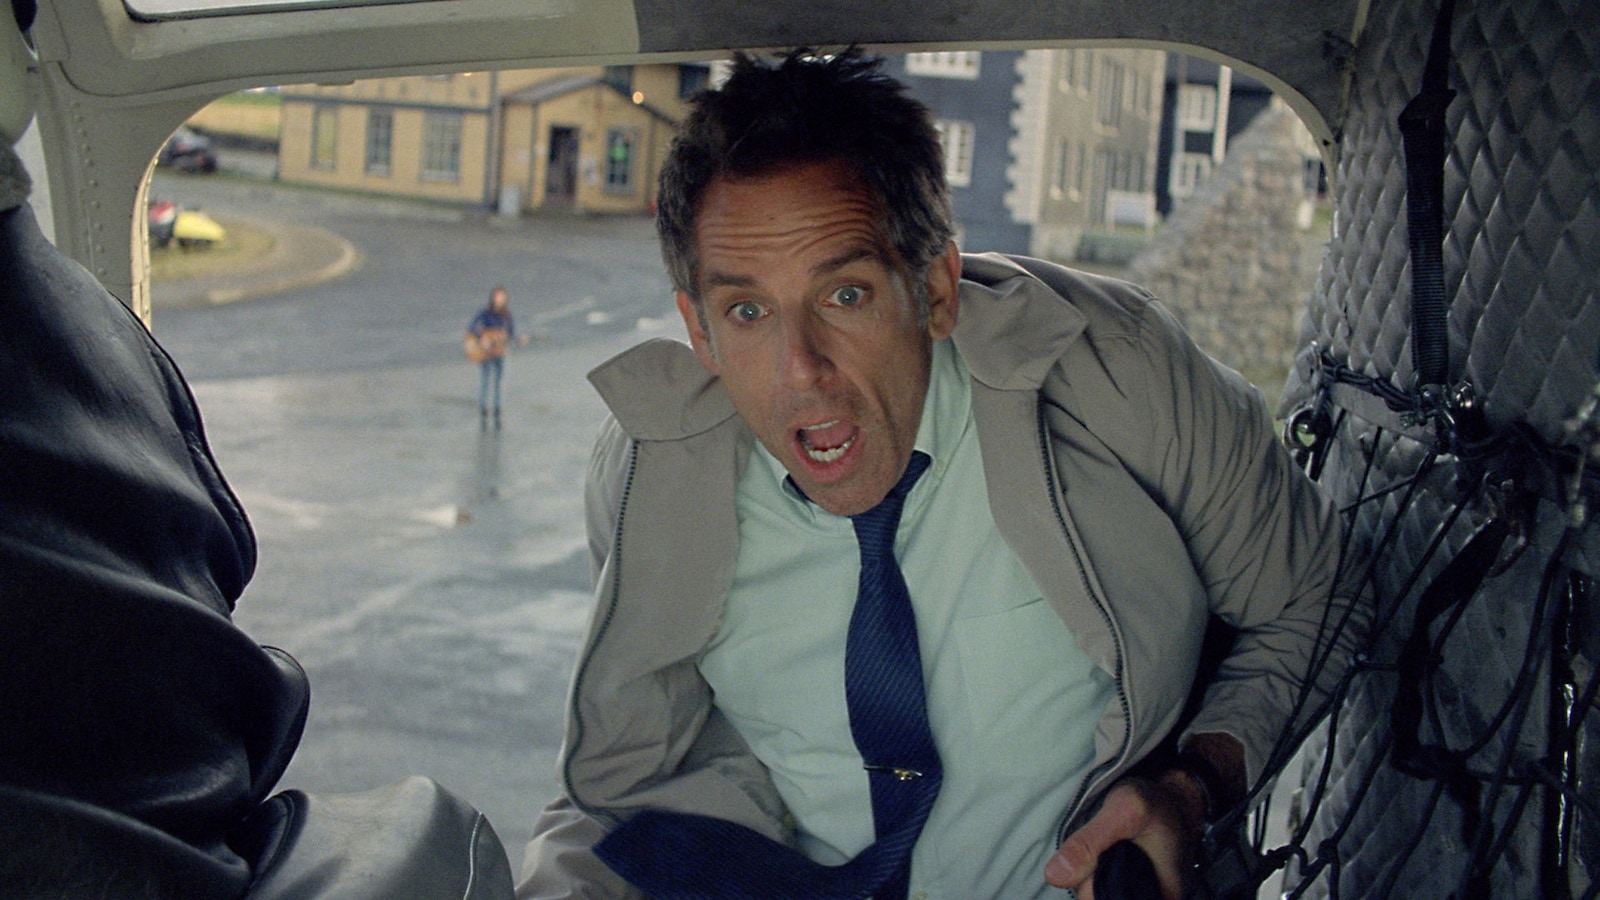 the-secret-life-of-walter-mitty-2013